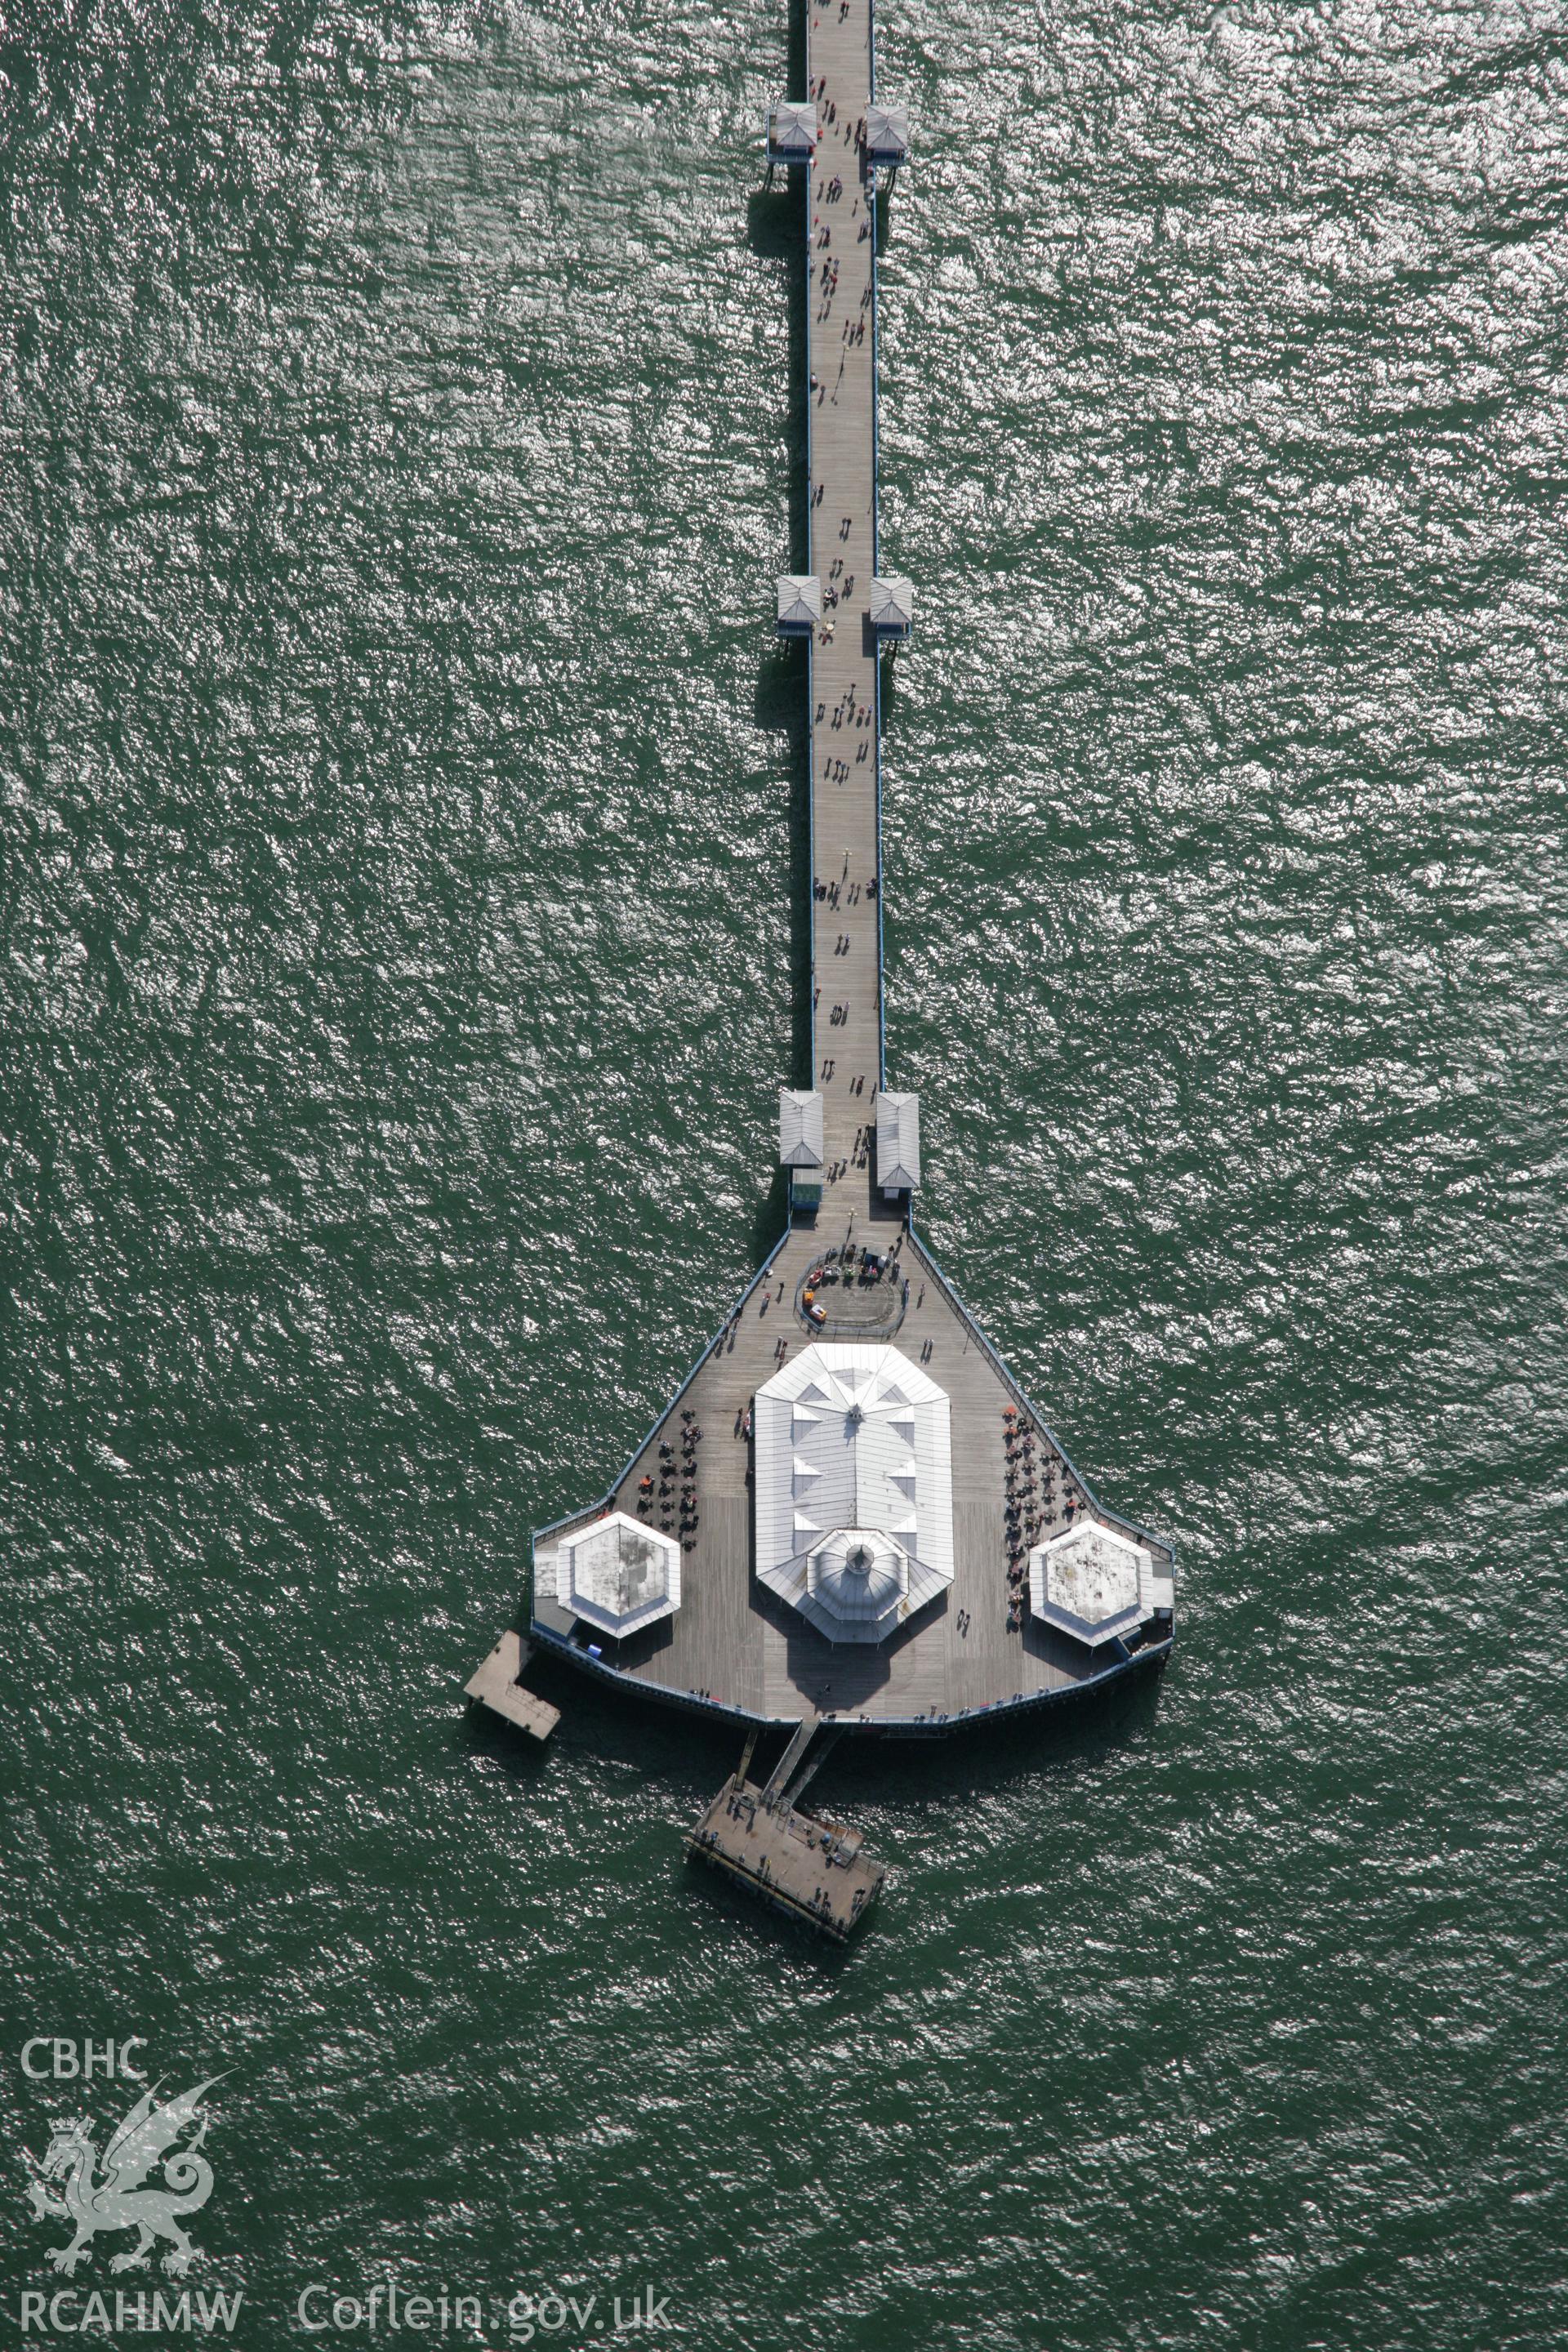 RCAHMW colour oblique aerial photograph of Llandudno Pier. Taken on 14 August 2006 by Toby Driver.